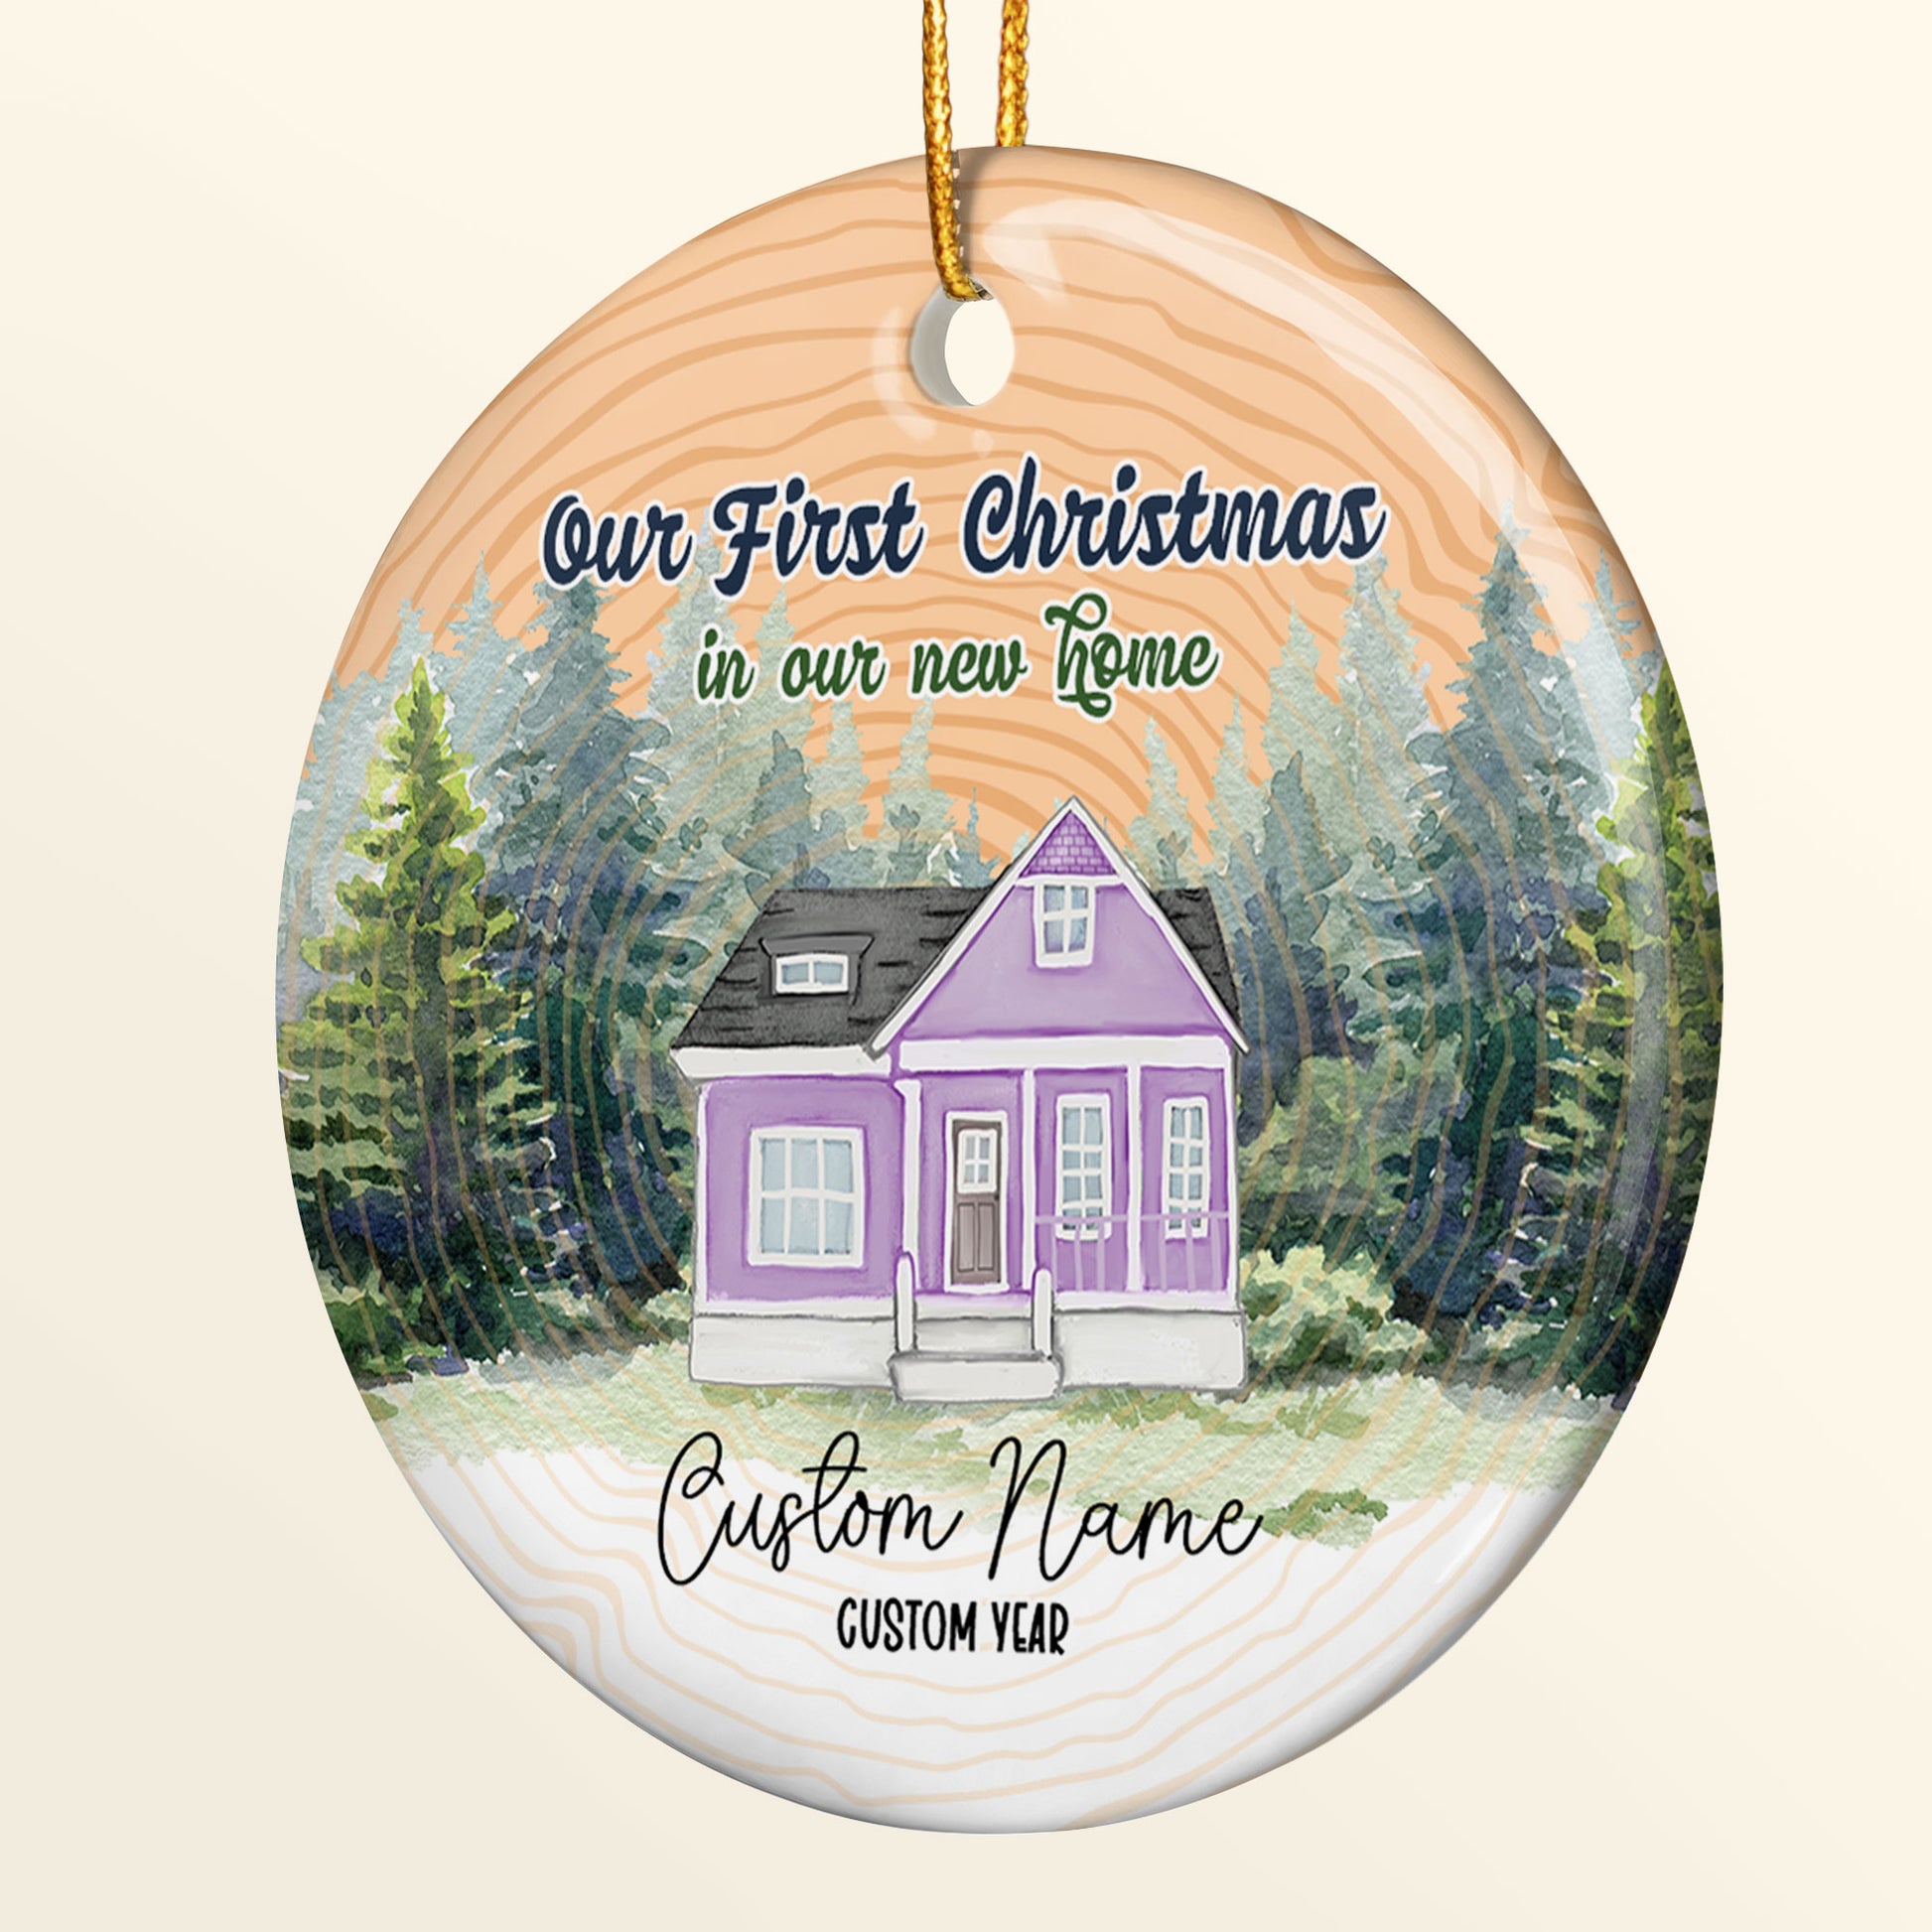 Our First Christmas In Our New Home - Personalized Ceramic Ornament - Christmas Gift For Friends And Family